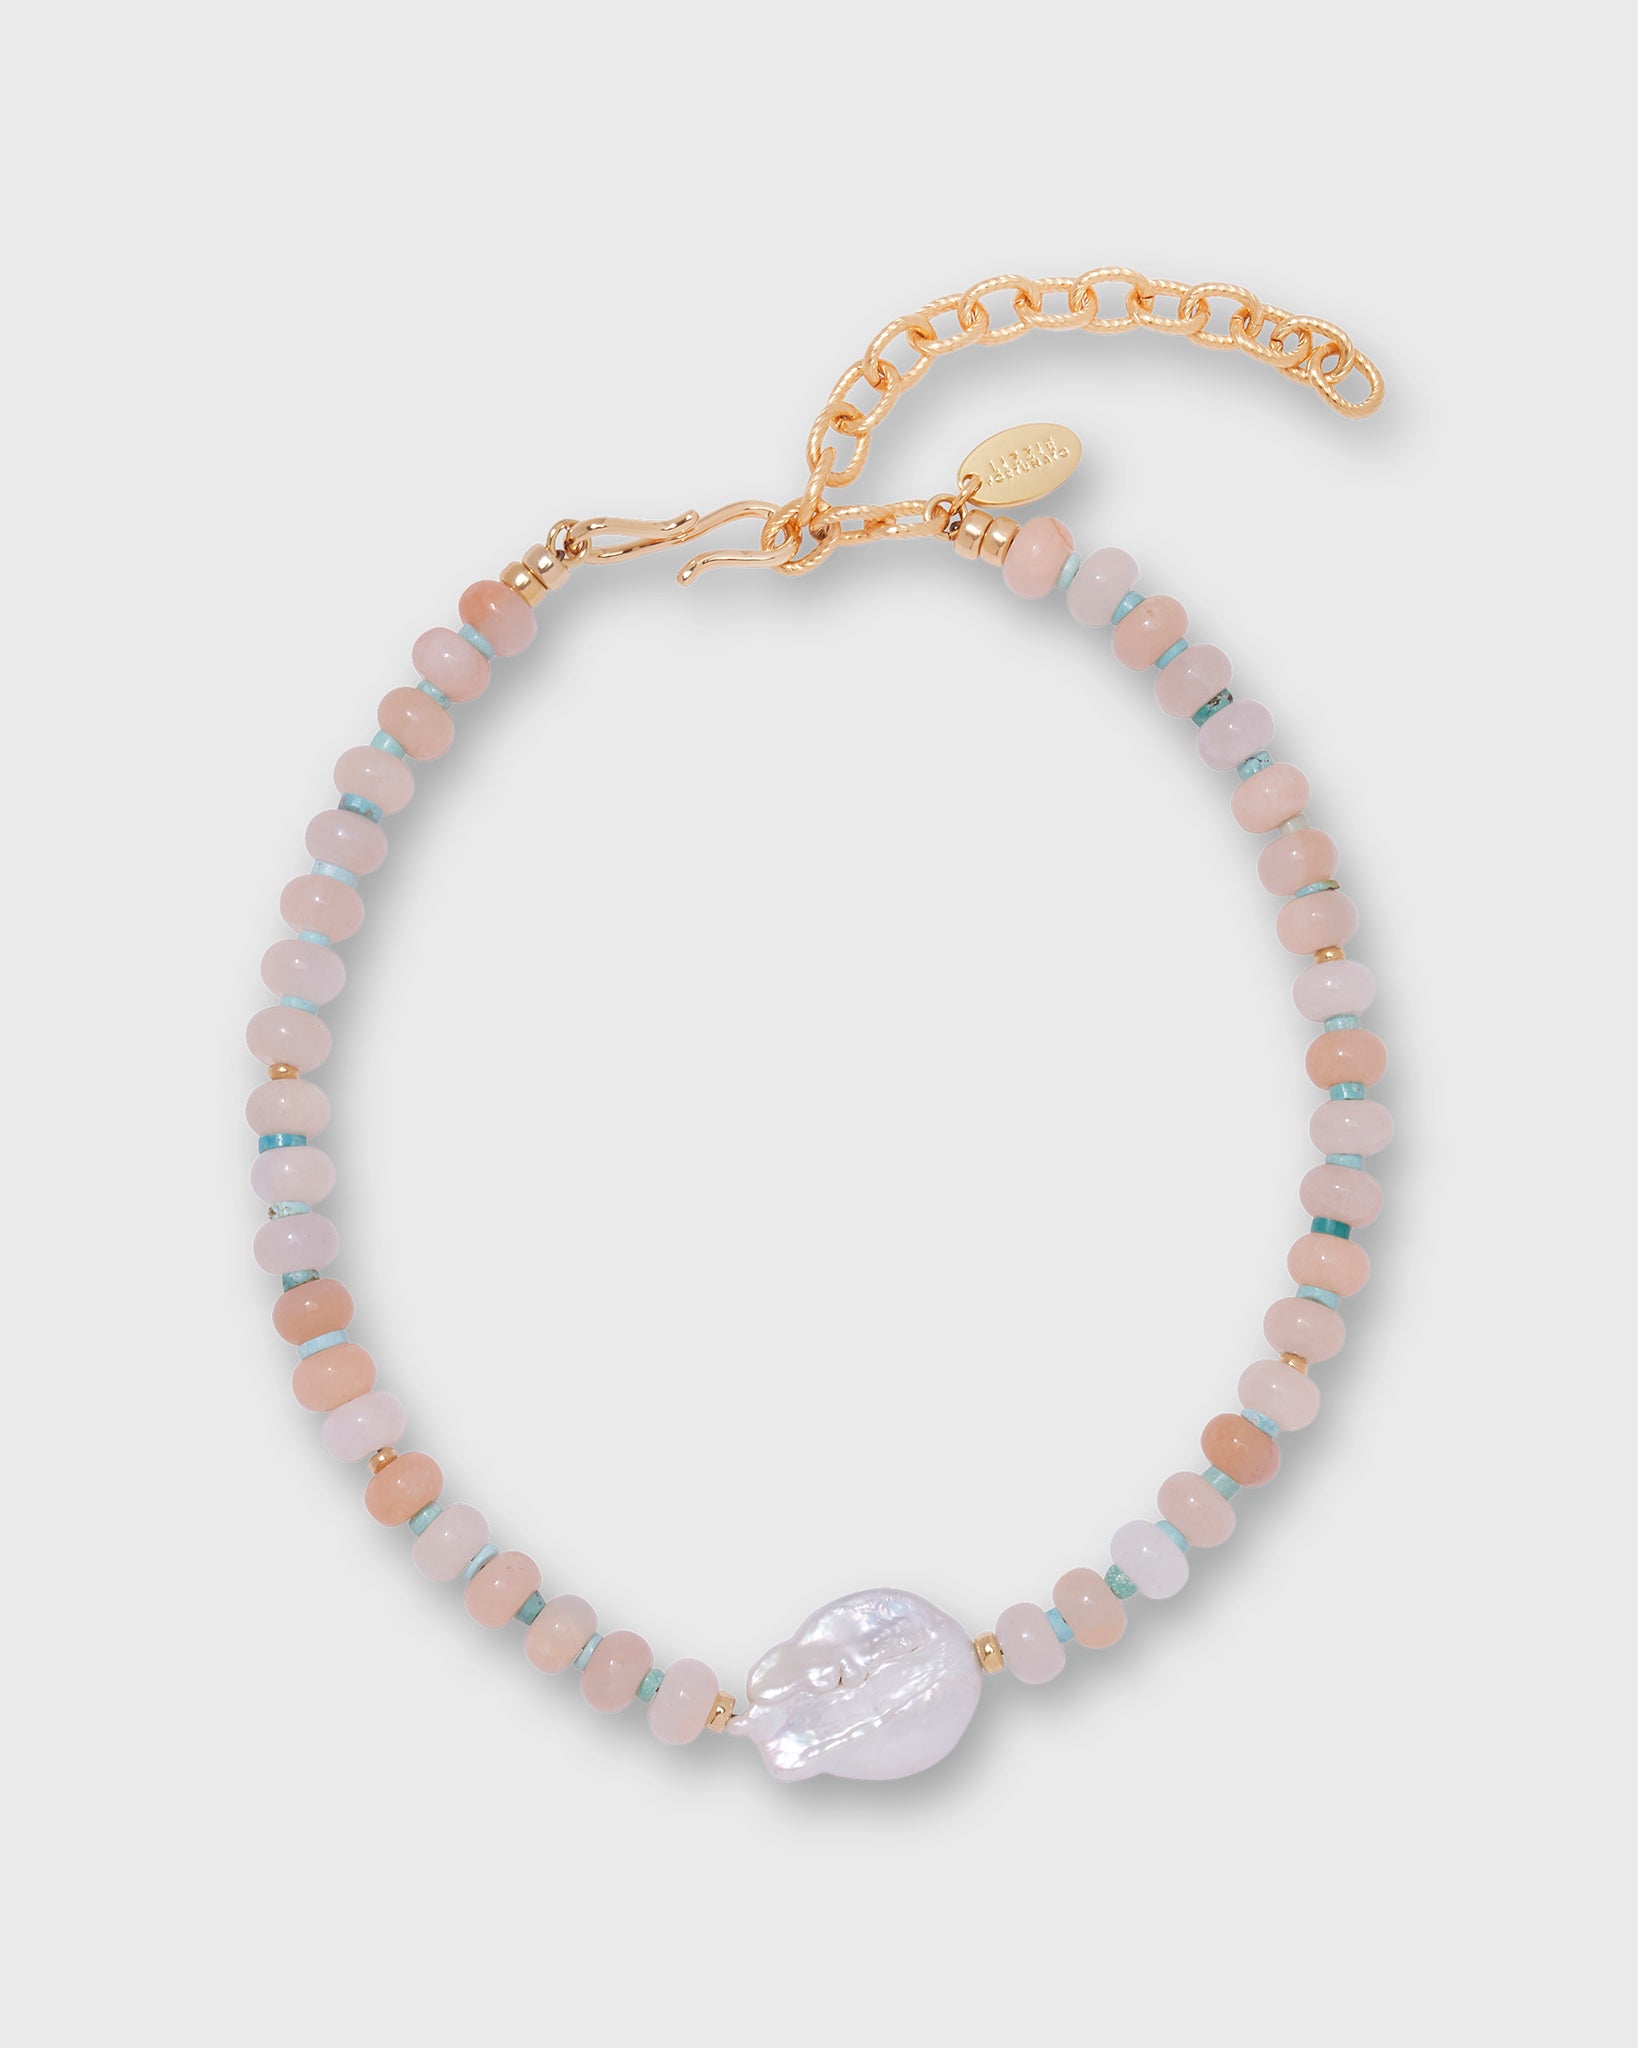 Waverly Necklace in Peach